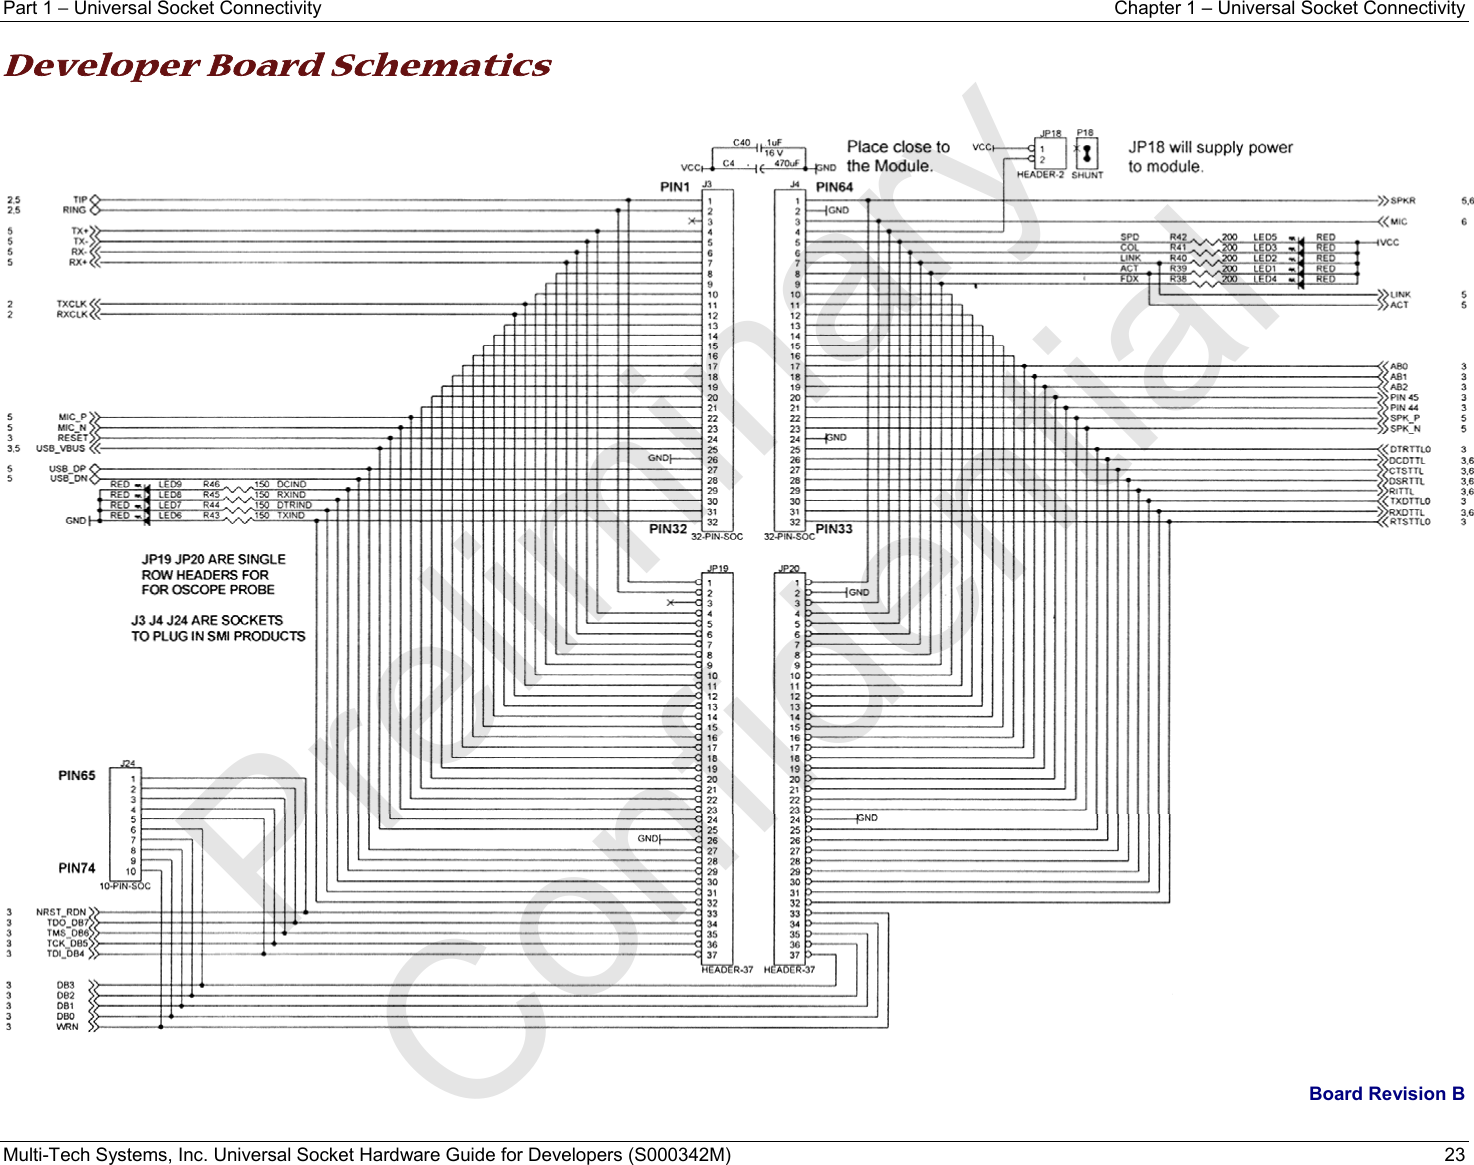 Part 1 − Universal Socket Connectivity  Chapter 1 – Universal Socket Connectivity Multi-Tech Systems, Inc. Universal Socket Hardware Guide for Developers (S000342M)  23  Developer Board Schematics     Board Revision B   Preliminary  Confidential